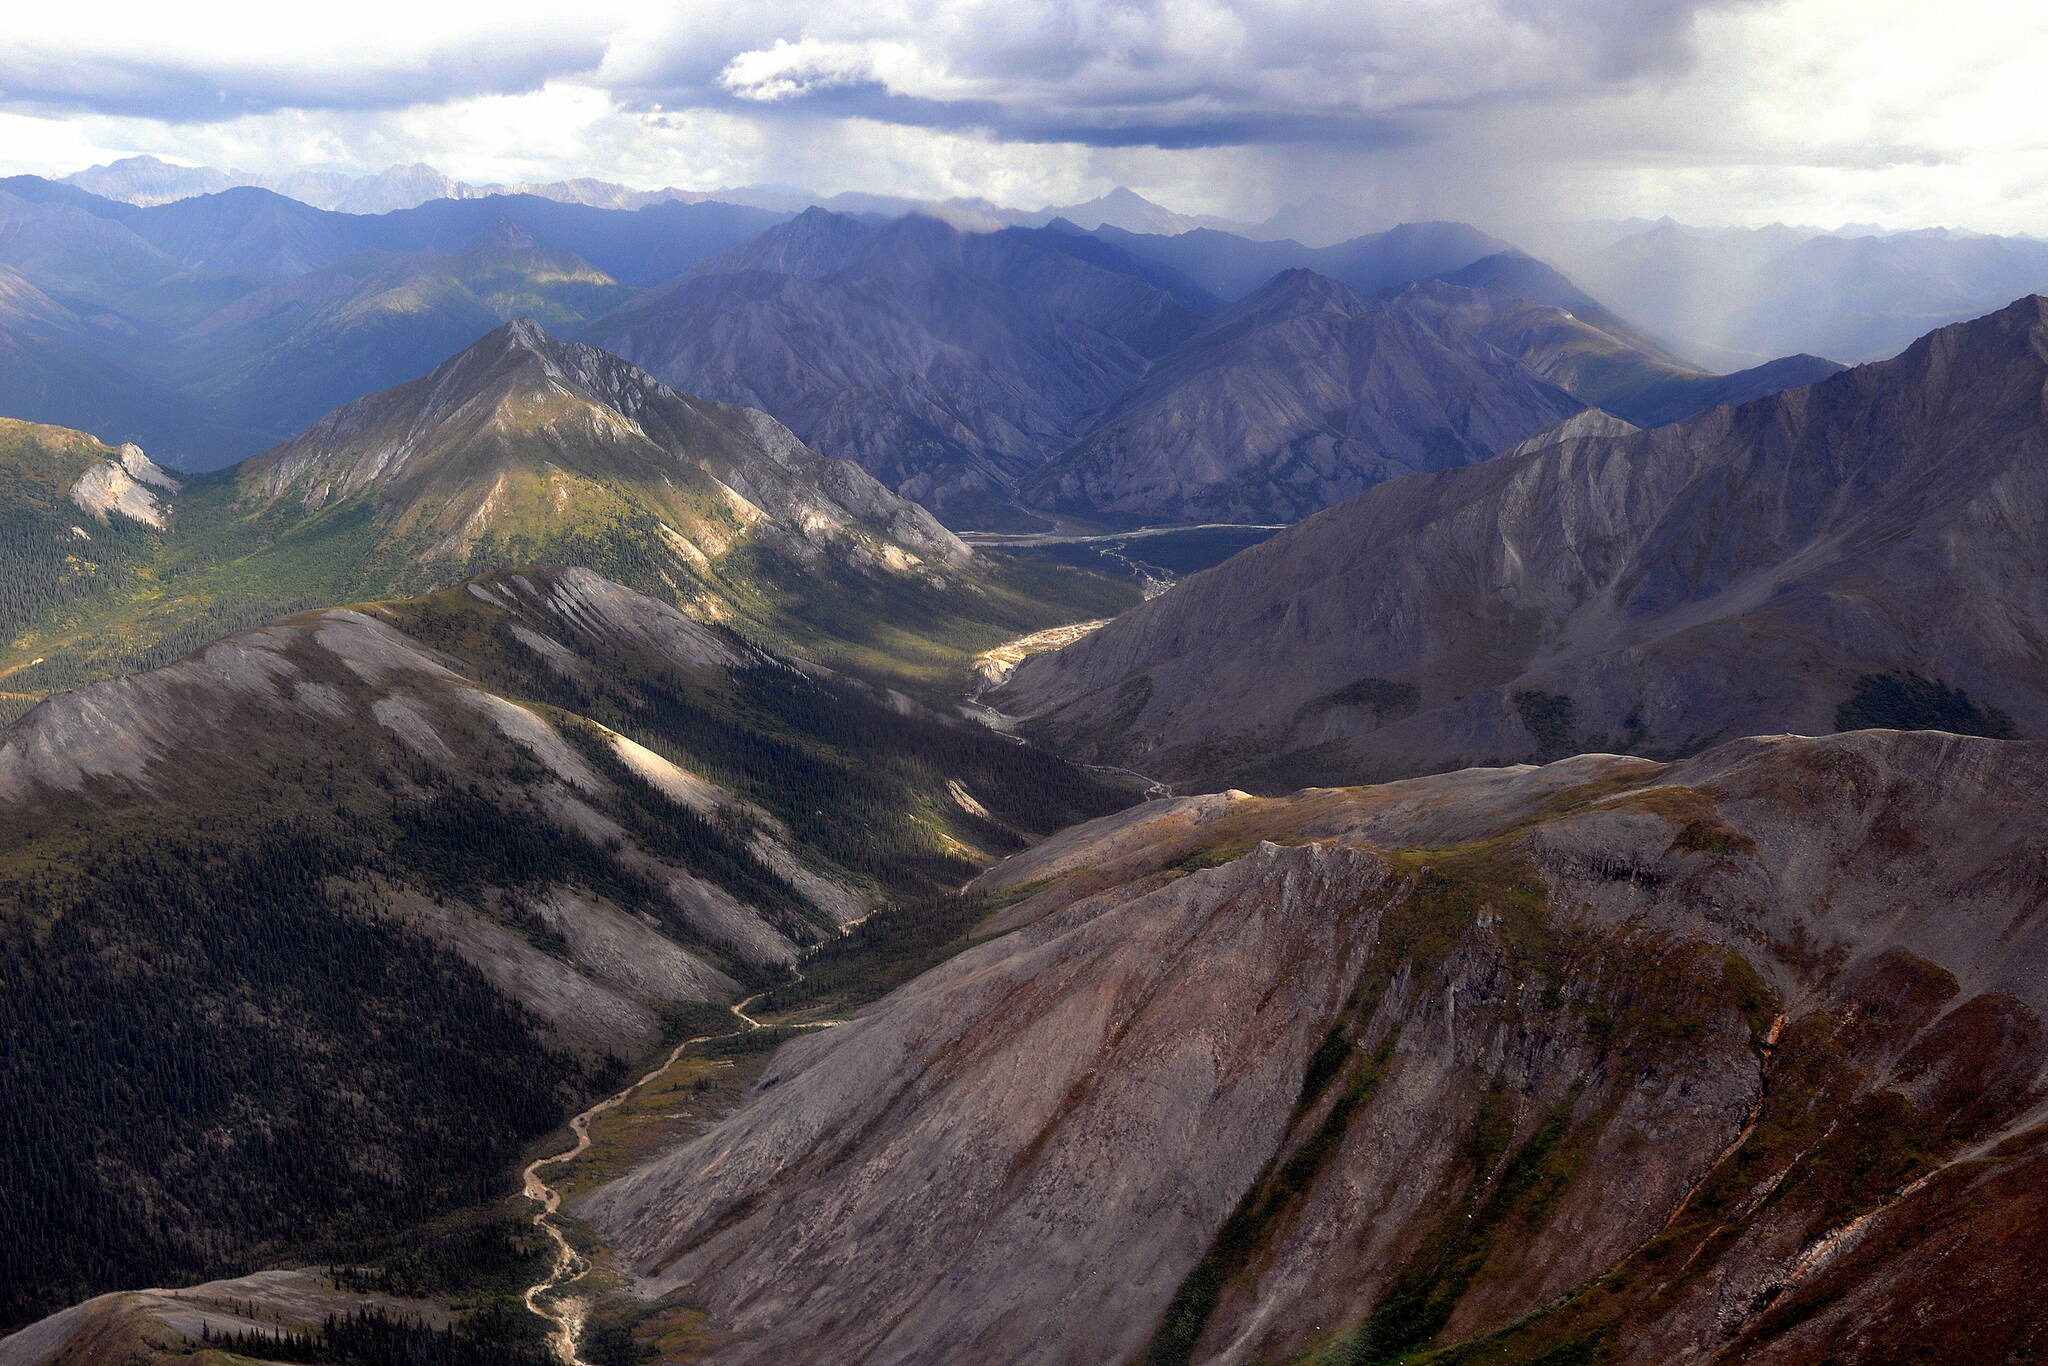 In an undated image provided by Ken Hill/National Park Service, Alaska, the headwaters of the Ambler River in the Noatak National Preserve of Alaska, near where a proposed access road would end. The Biden administration is expected to deny permission for a mining company to build a 211-mile industrial road through fragile Alaskan wilderness, handing a victory to environmentalists in an election year when the president wants to underscore his credentials as a climate leader and conservationist. (Ken Hill/National Park Service, Alaska via The New York Times)